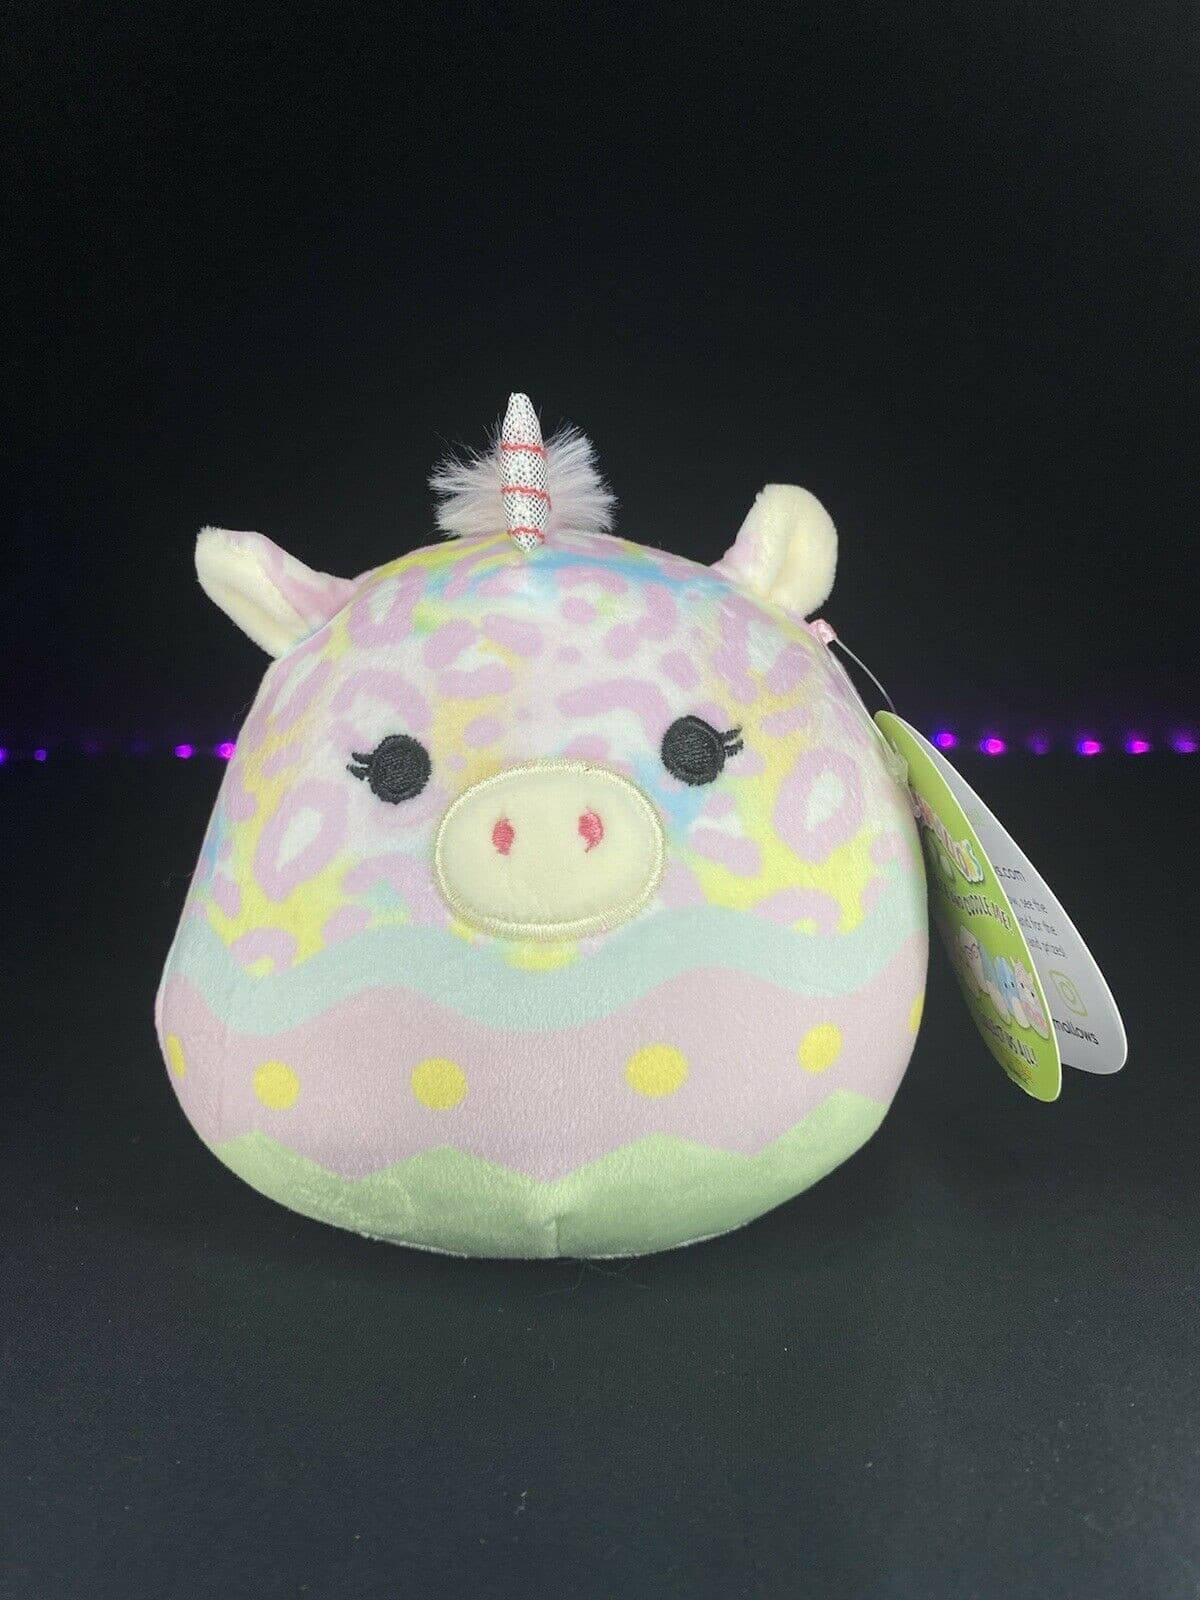 Squishmallow 5” Bexley the  Easter Unicorn Plush | Sweet Magnolia Charms.